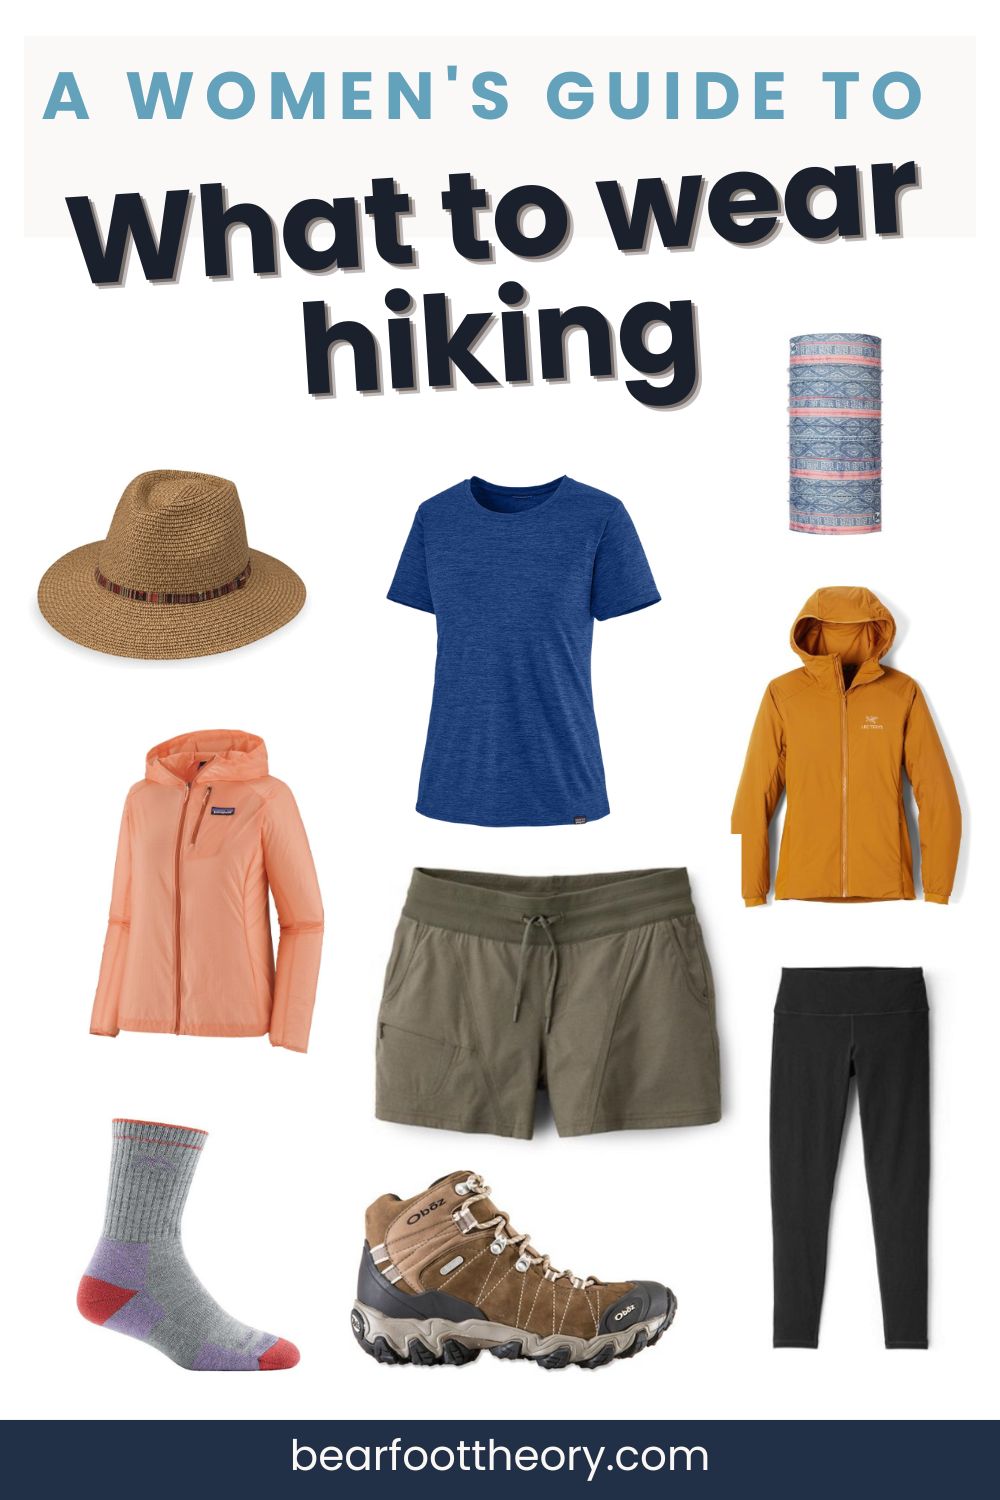 Looking for the perfect outfit to wear on your next hiking adventure? Check out our blog post for some awesome ideas and inspiration! From breathable tops to comfortable hiking boots, we've got you covered with all the tips and tricks you need to create a stylish and functional hiking outfit that's perfect for women. Whether you're hitting the trails for a leisurely stroll or tackling a more challenging hike, we've got all the essentials you need to stay comfortable and stylish on the go.